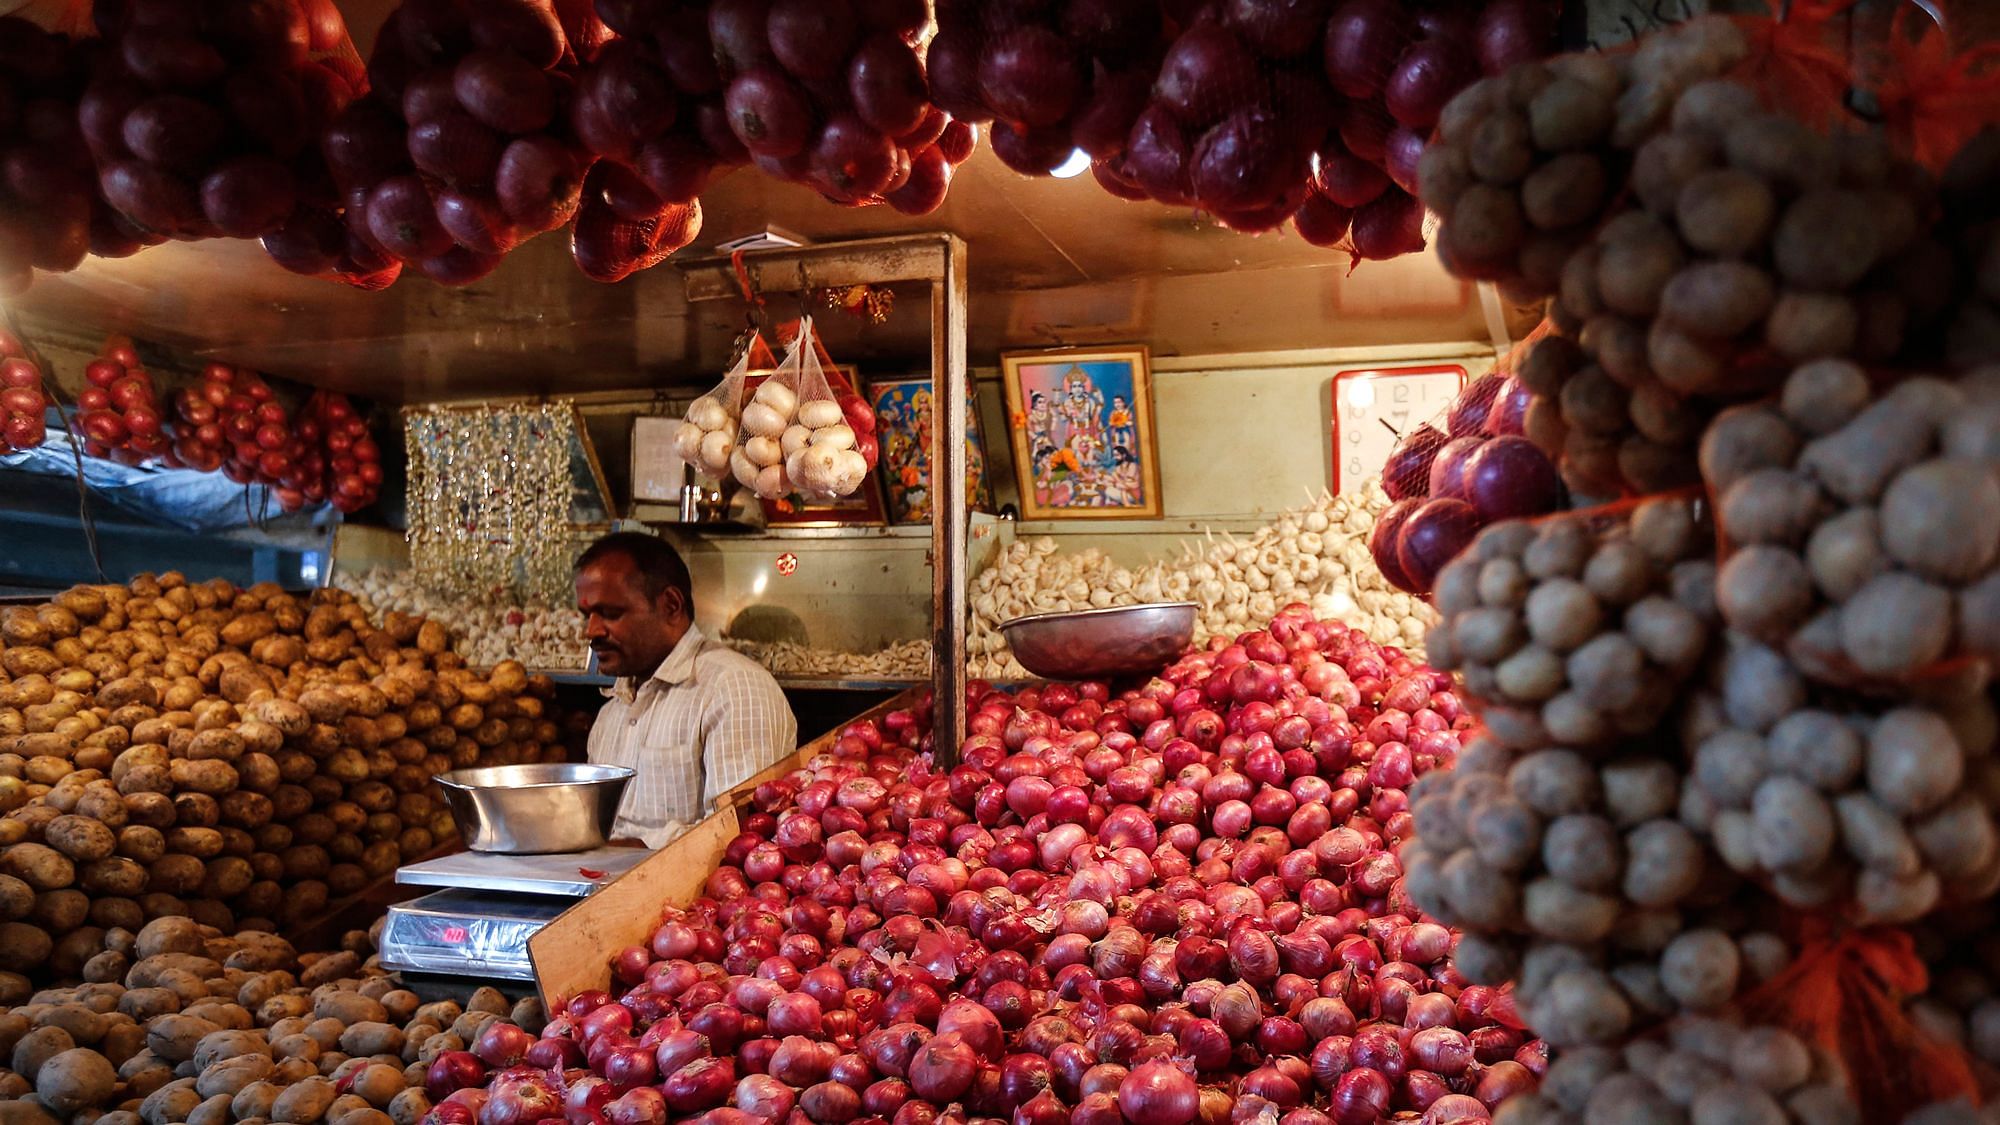 Retail inflation slowed to 5.91 percent in March over the previous month, mainly due to easing food prices, government data showed